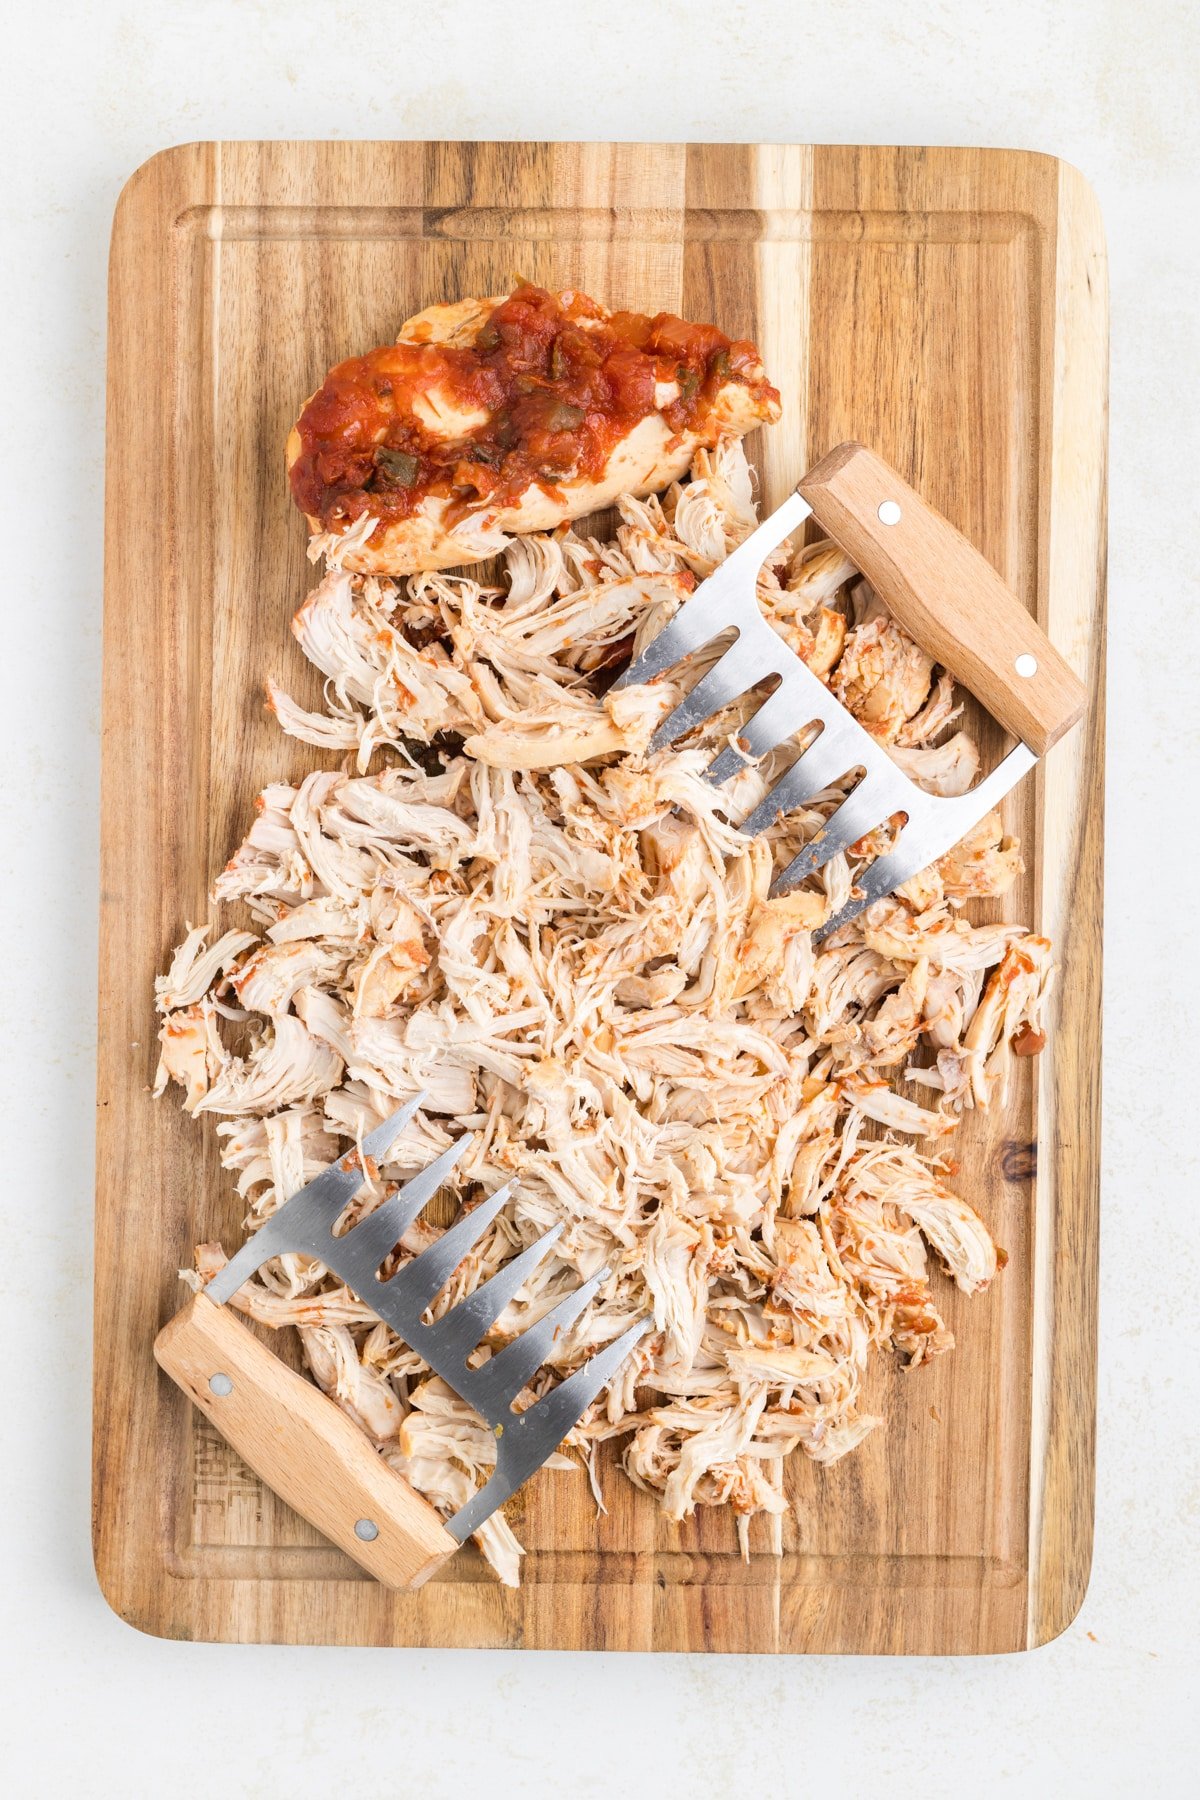 Using meat shredders to shred chicken breasts on a wooden cutting board.